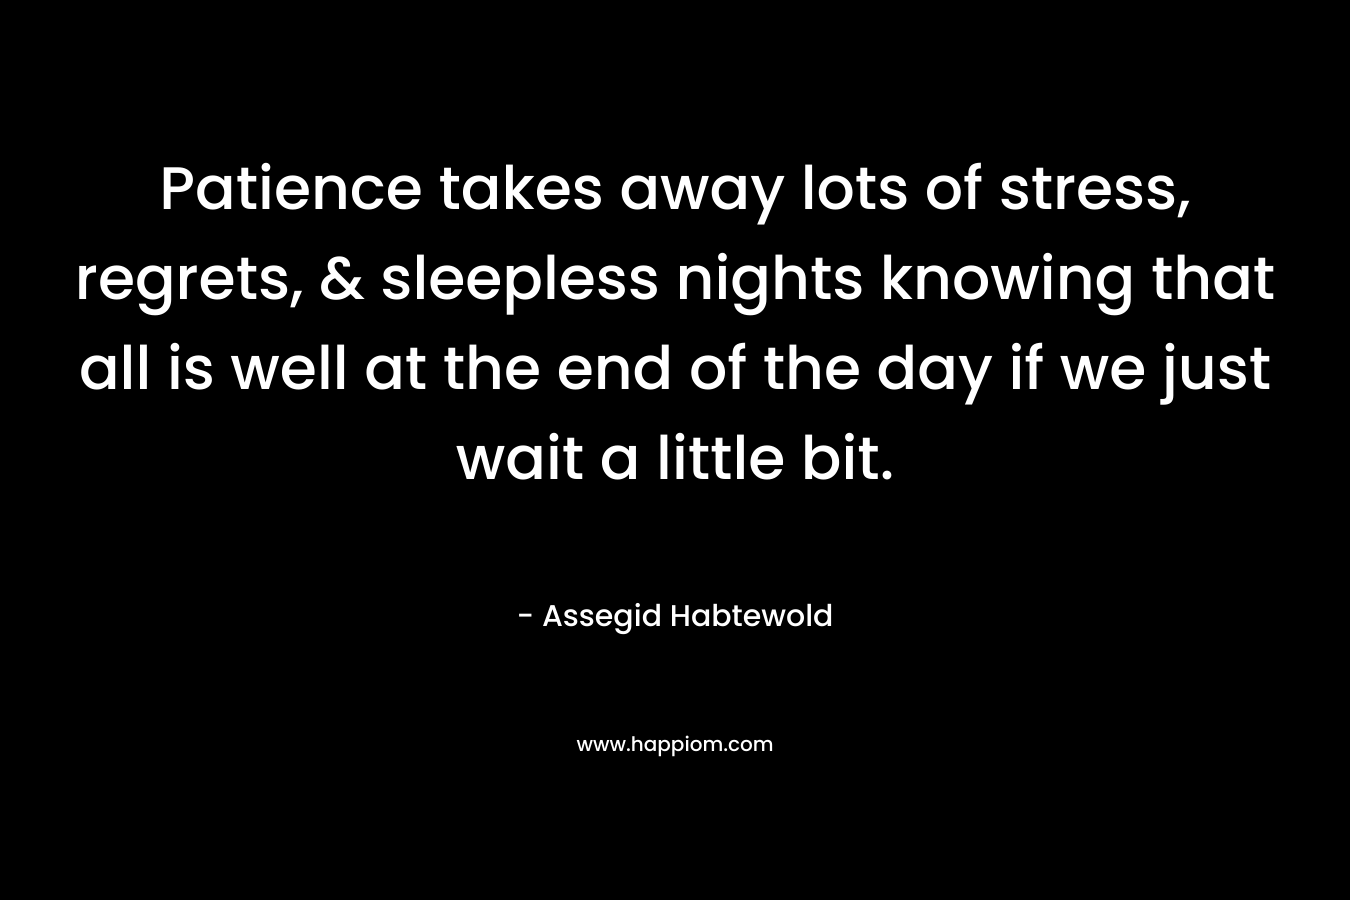 Patience takes away lots of stress, regrets, & sleepless nights knowing that all is well at the end of the day if we just wait a little bit. – Assegid Habtewold